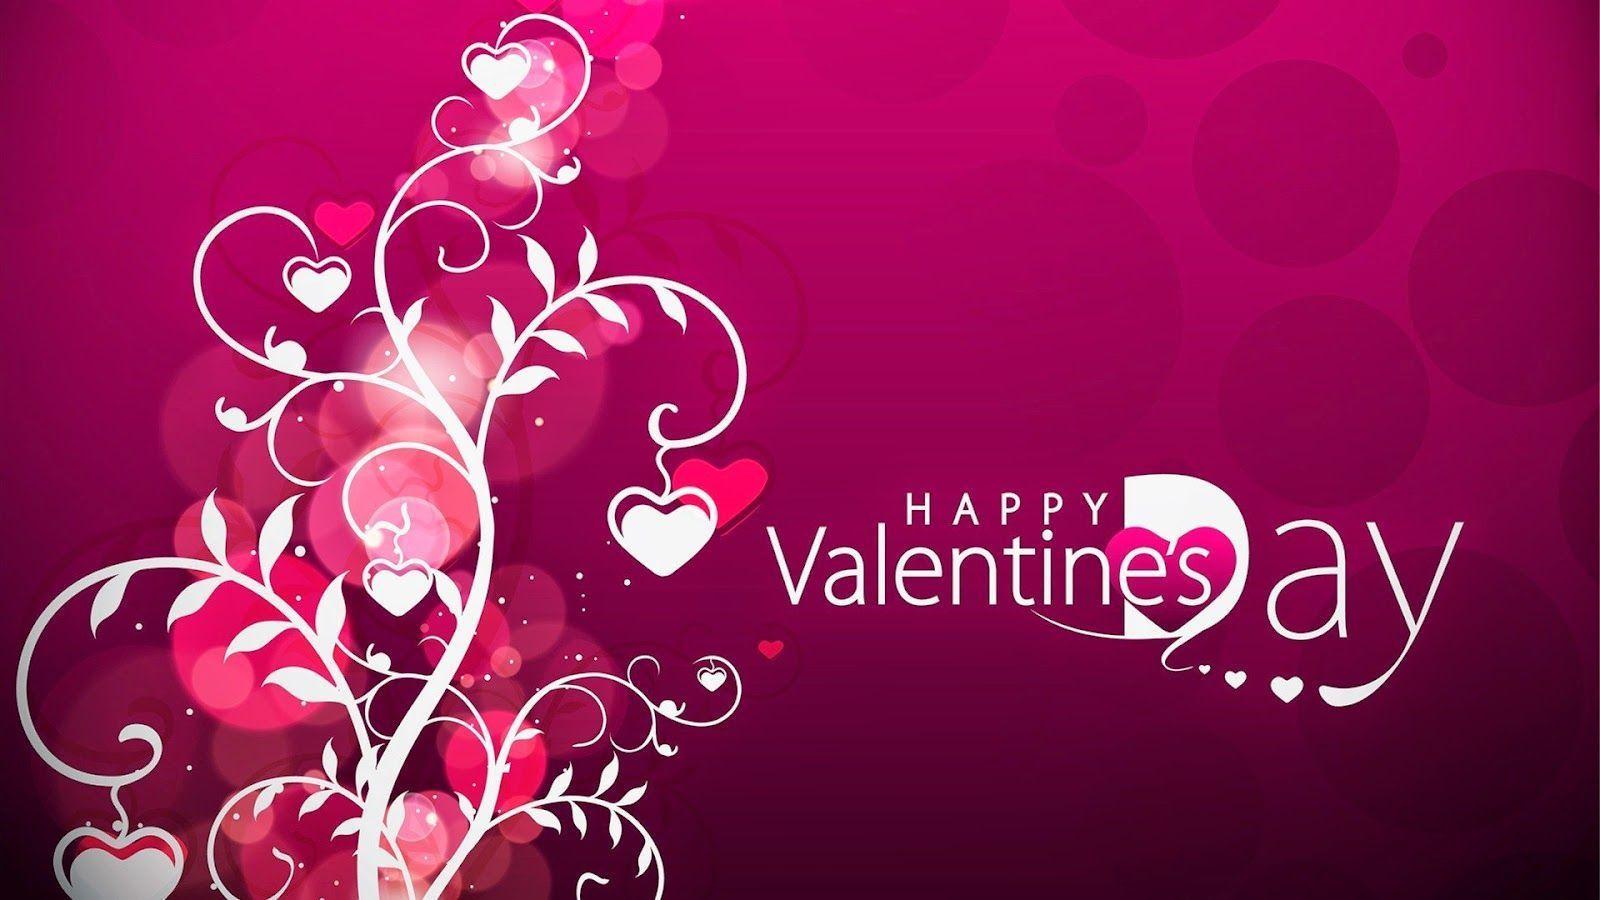 15 New Valentine's Day Desktop Wallpapers for 2015